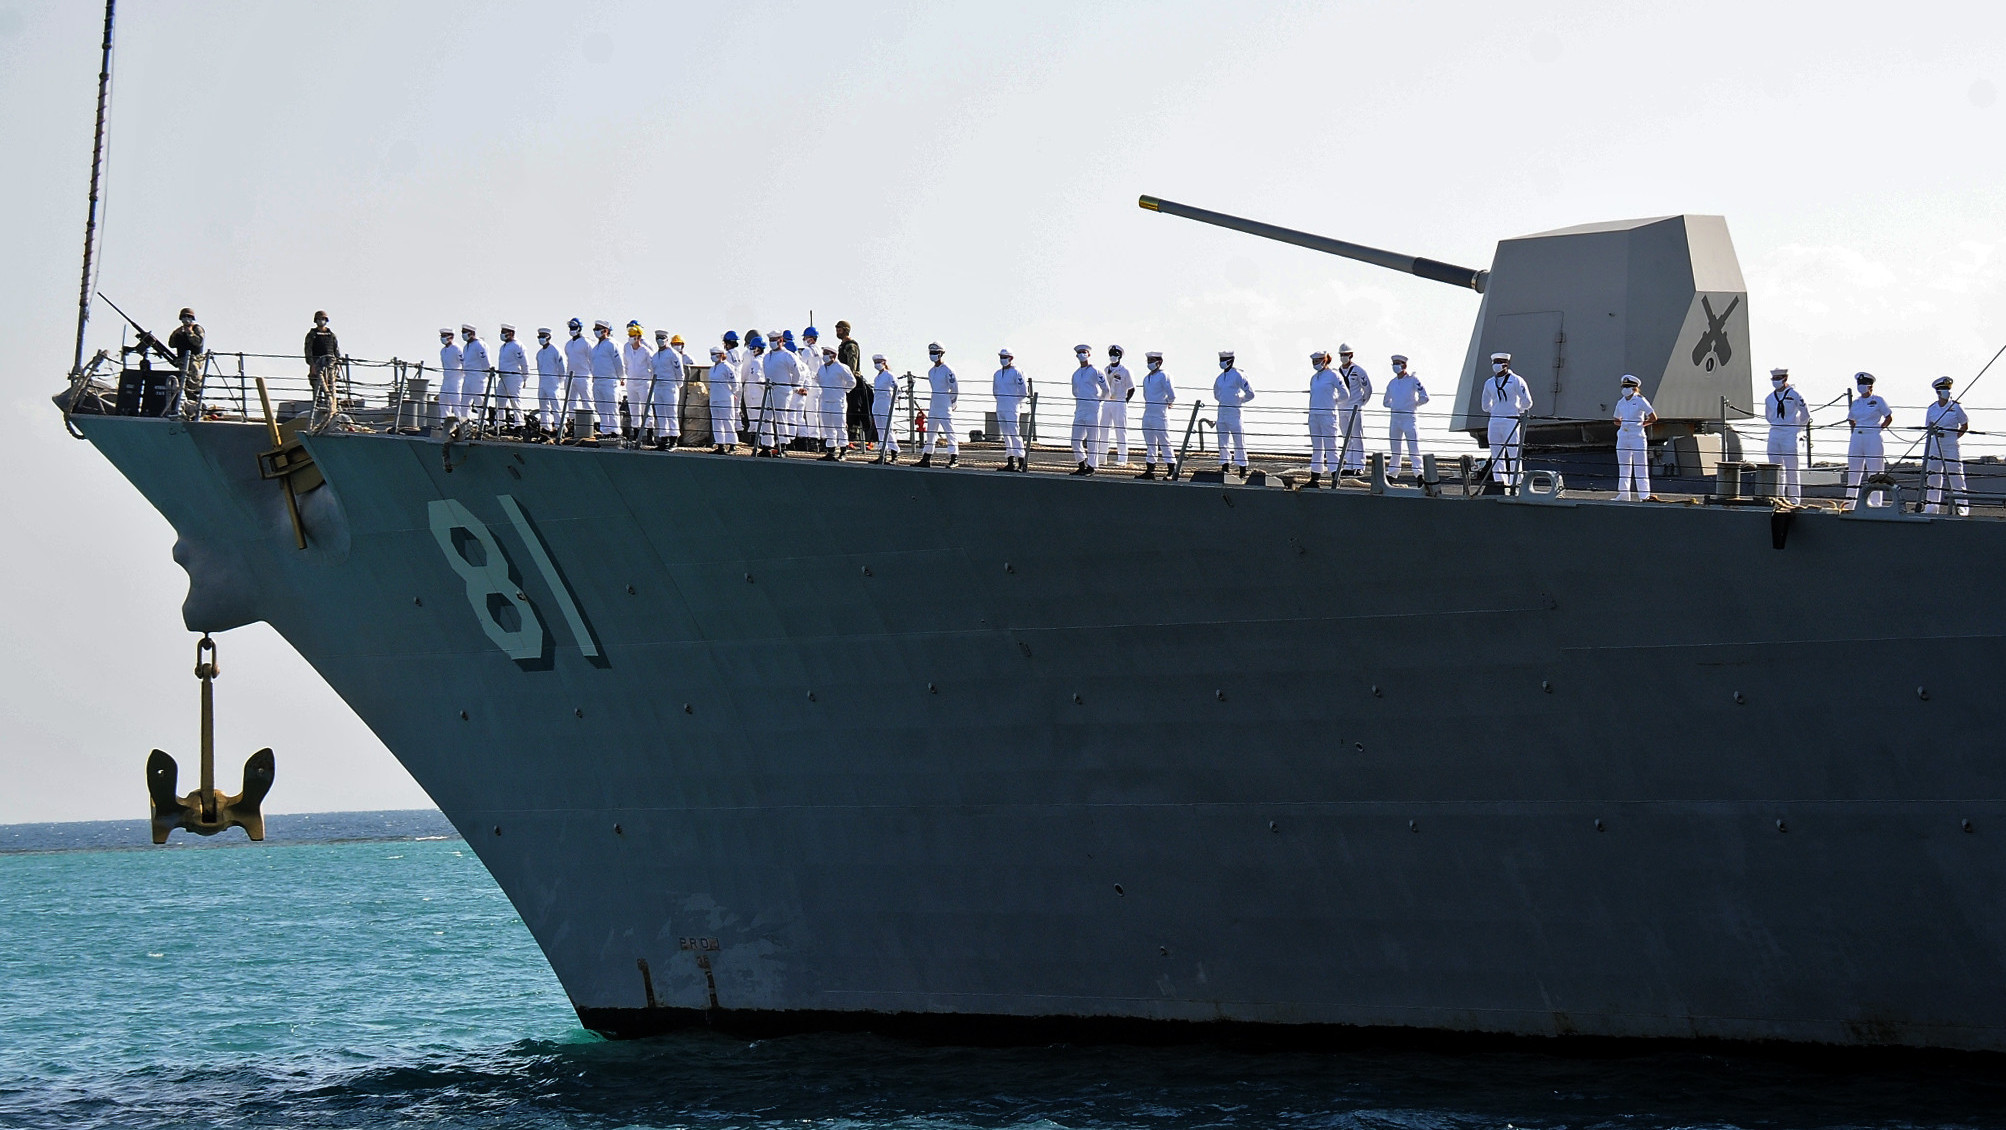 US sailors look on as they stand aboard the US Navy guided-missile destroyer USS Winston S. Churchill (DDG 81), part of Destroyer Squadron 2, while it anchors in Port Sudan on March 1, 2021.  (Photo: AFP, Getty Images)